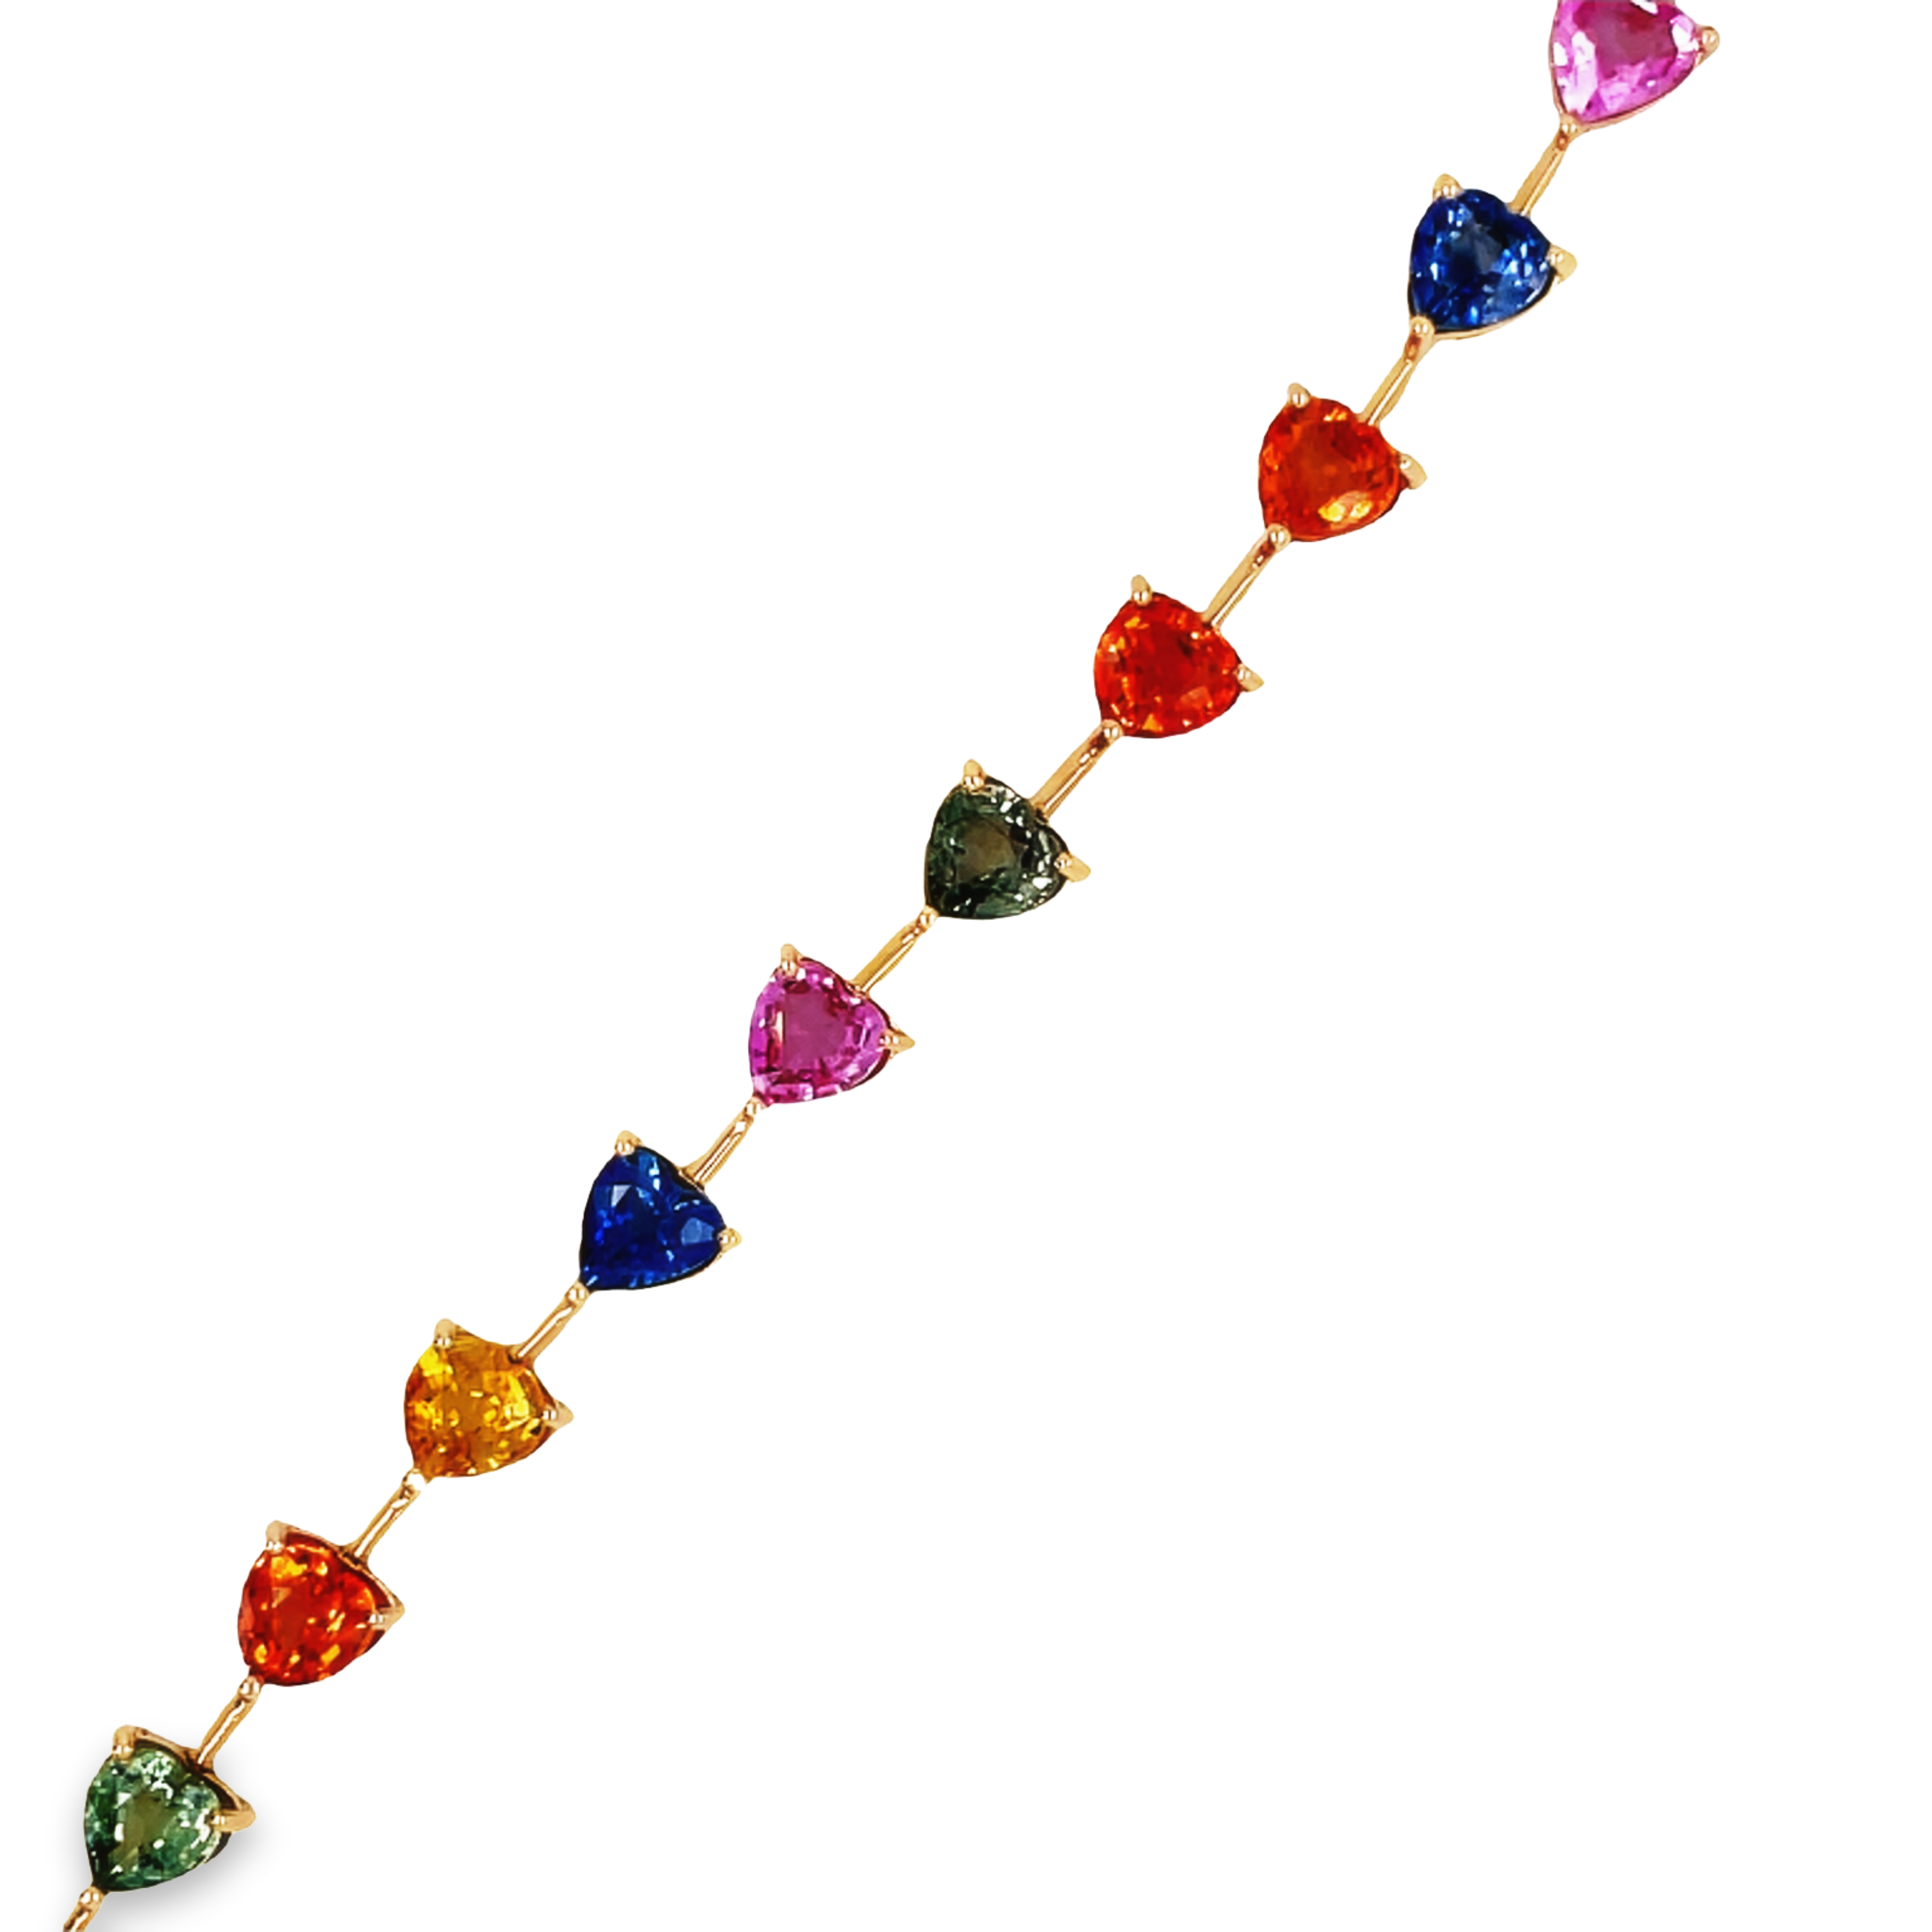 This beautiful 18k rose gold bracelet features a heart-shaped multi-colored sapphire totaling 12,007 cts. It's the perfect way to make a glamorous statement with sophistication.